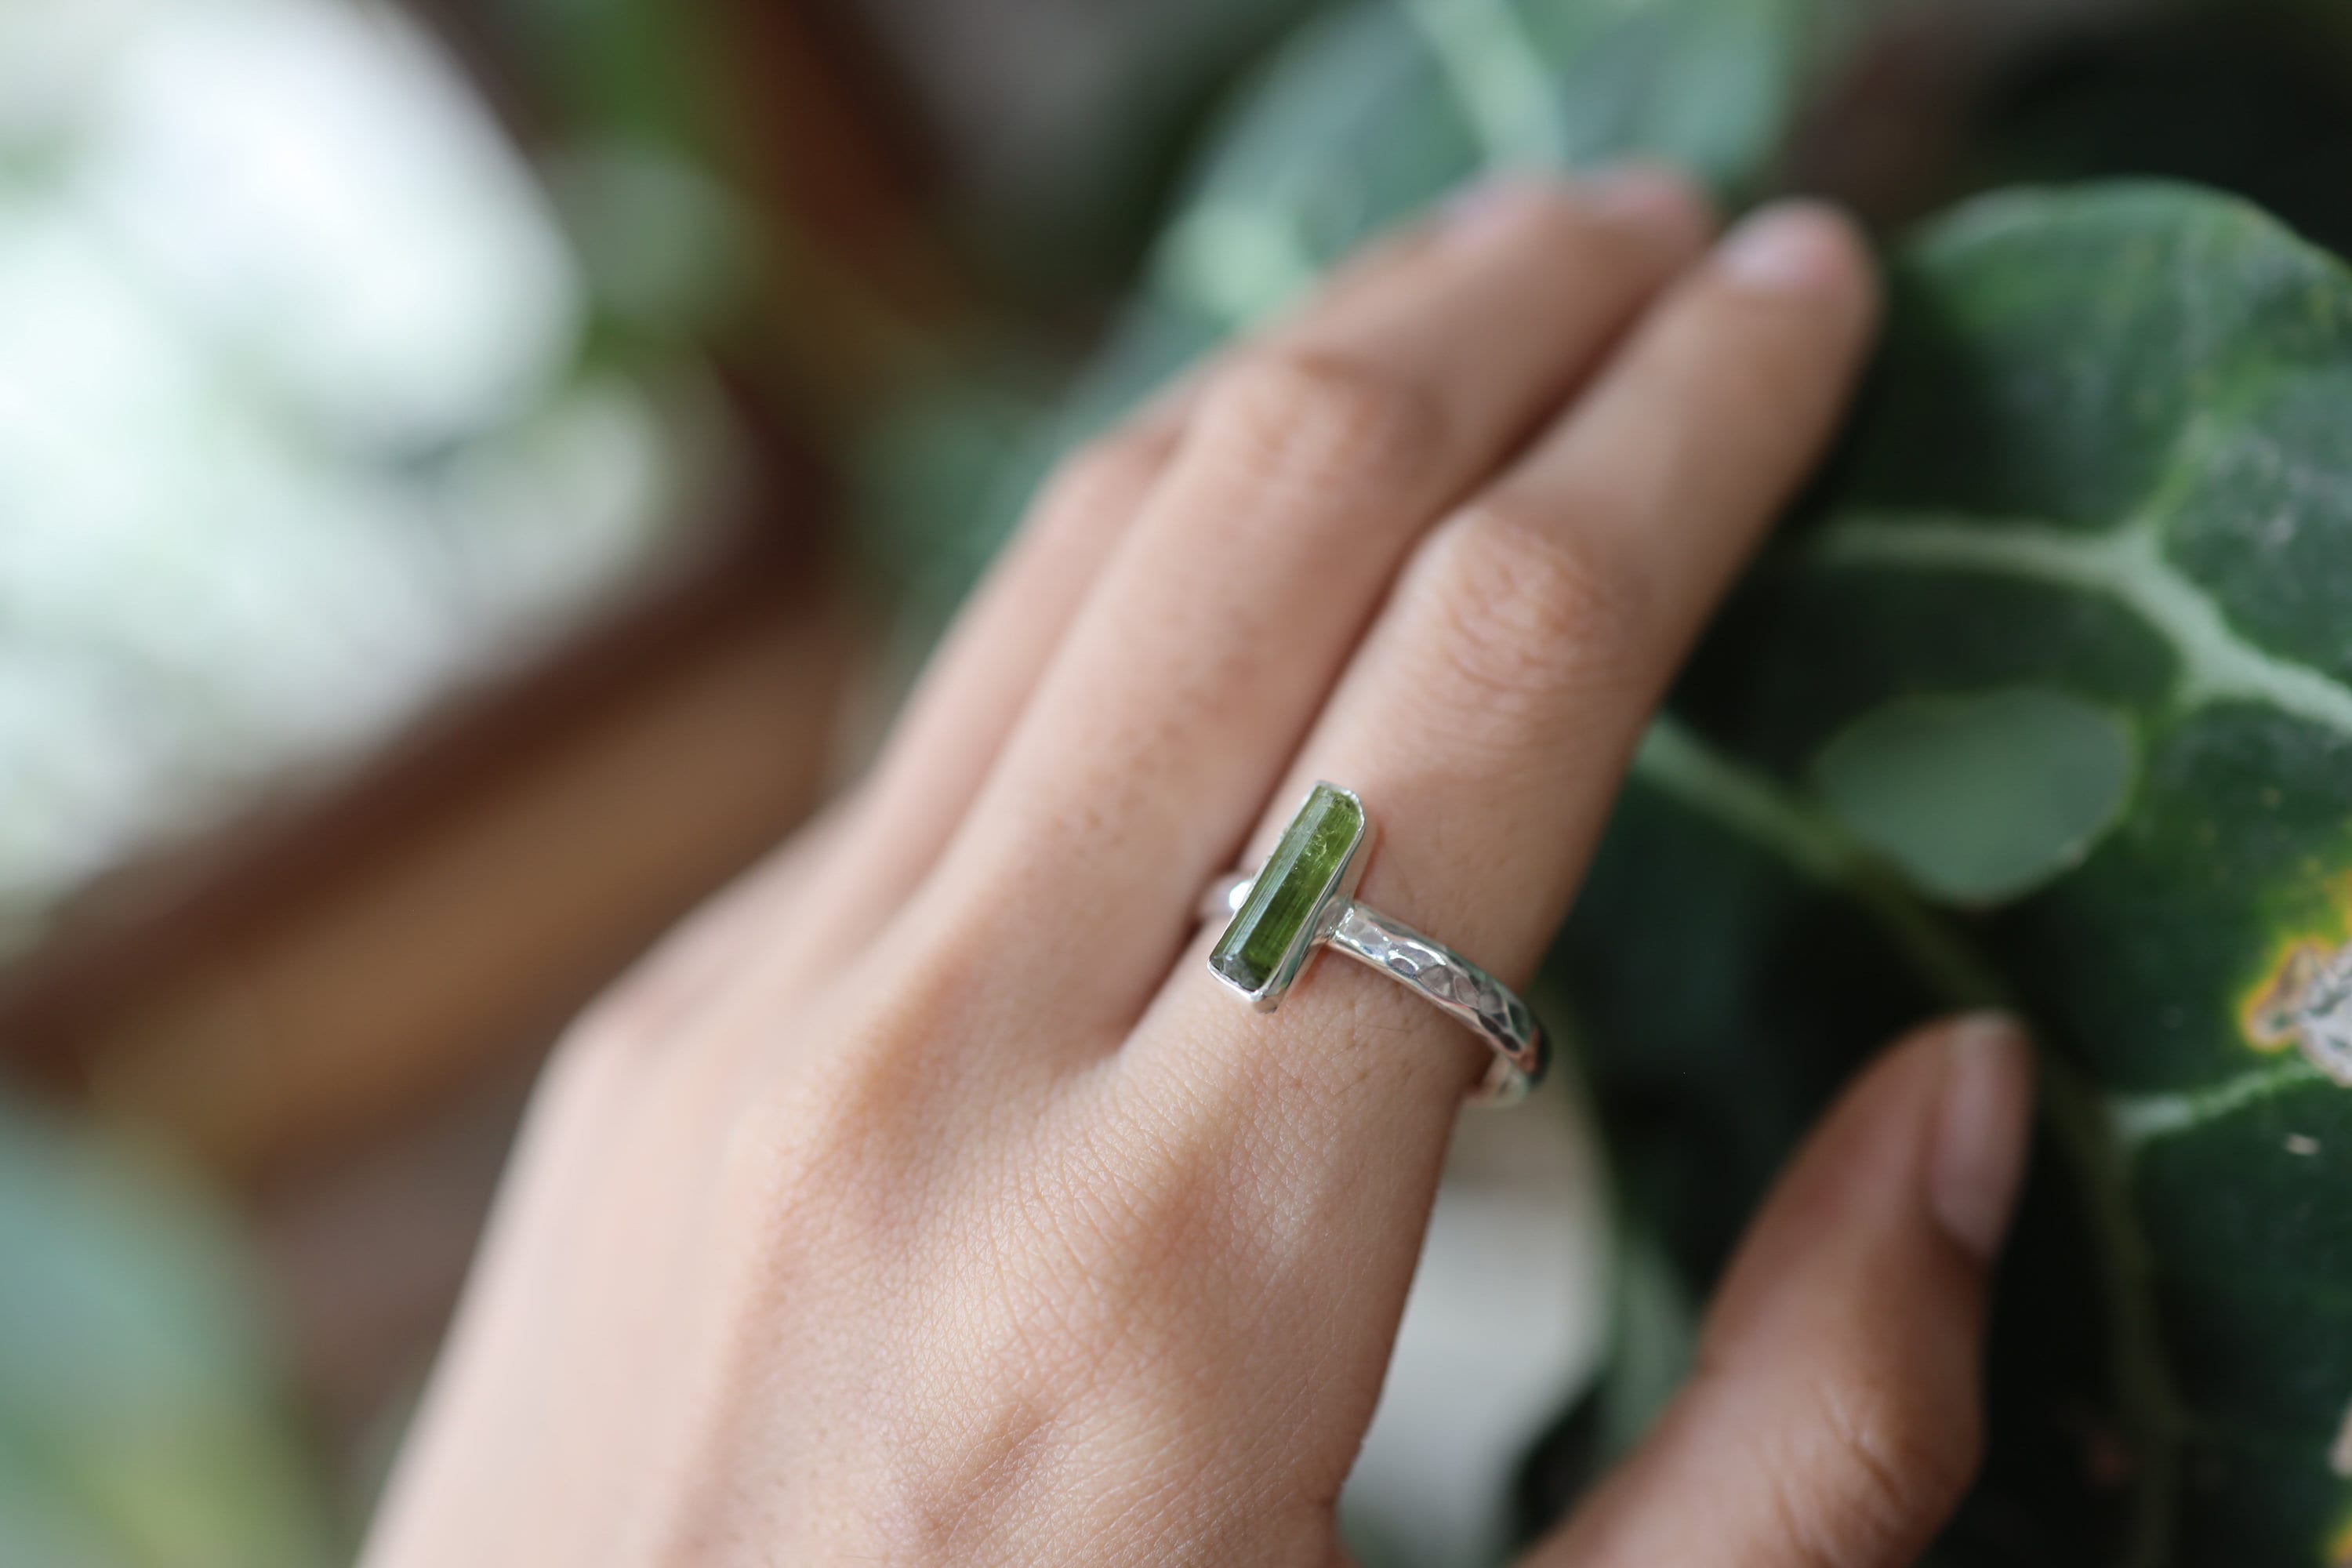 Verdant Touch: Green Tourmaline - Sterling Silver Ring - Hammer Textured & Shiny Finish - Size 9 US - NO/04